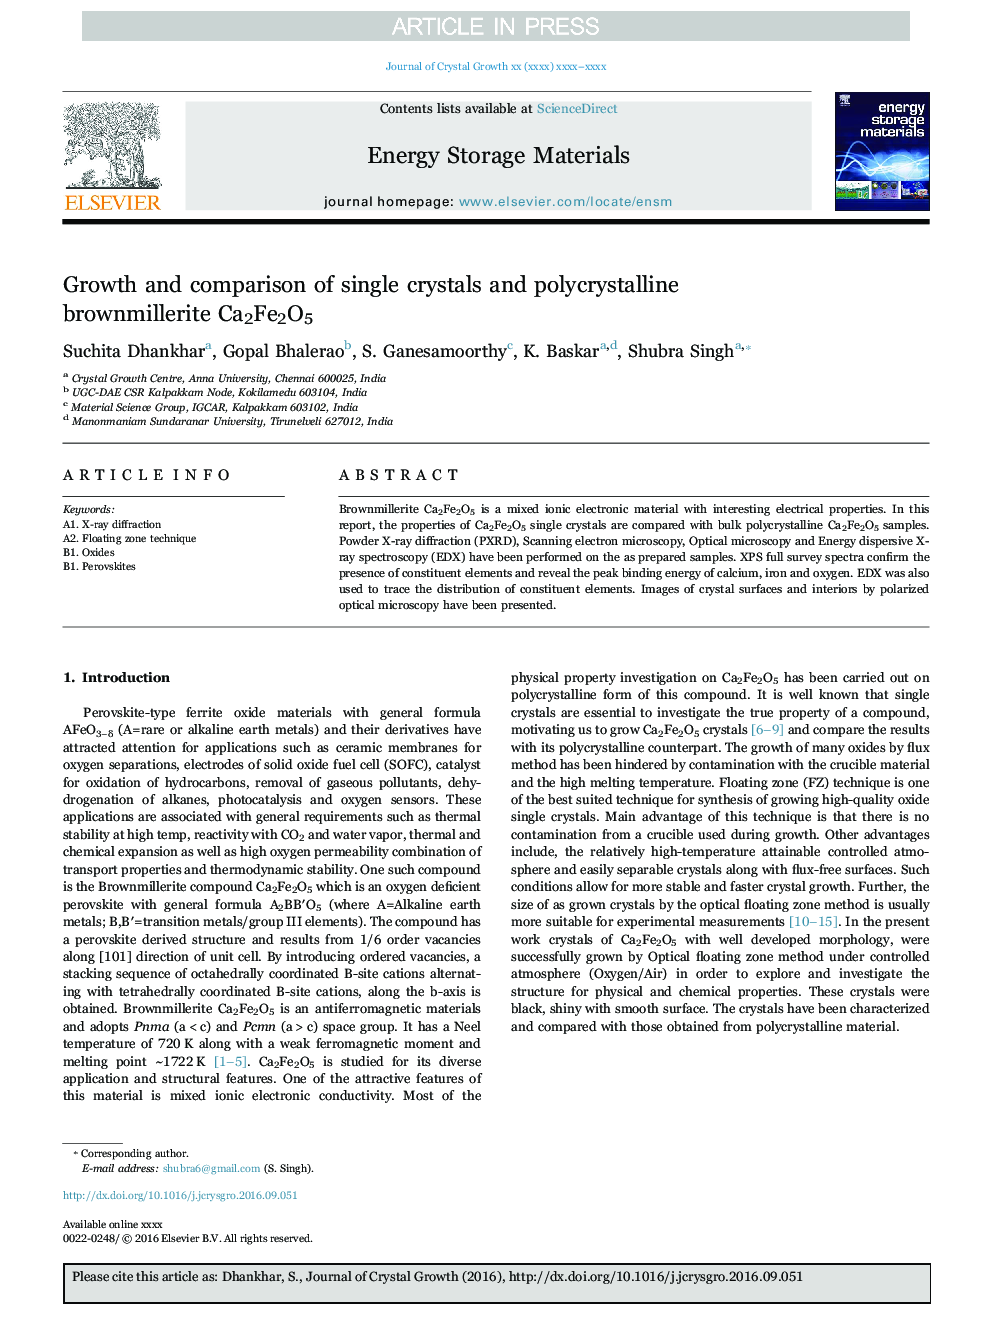 Growth and comparison of single crystals and polycrystalline brownmillerite Ca2Fe2O5